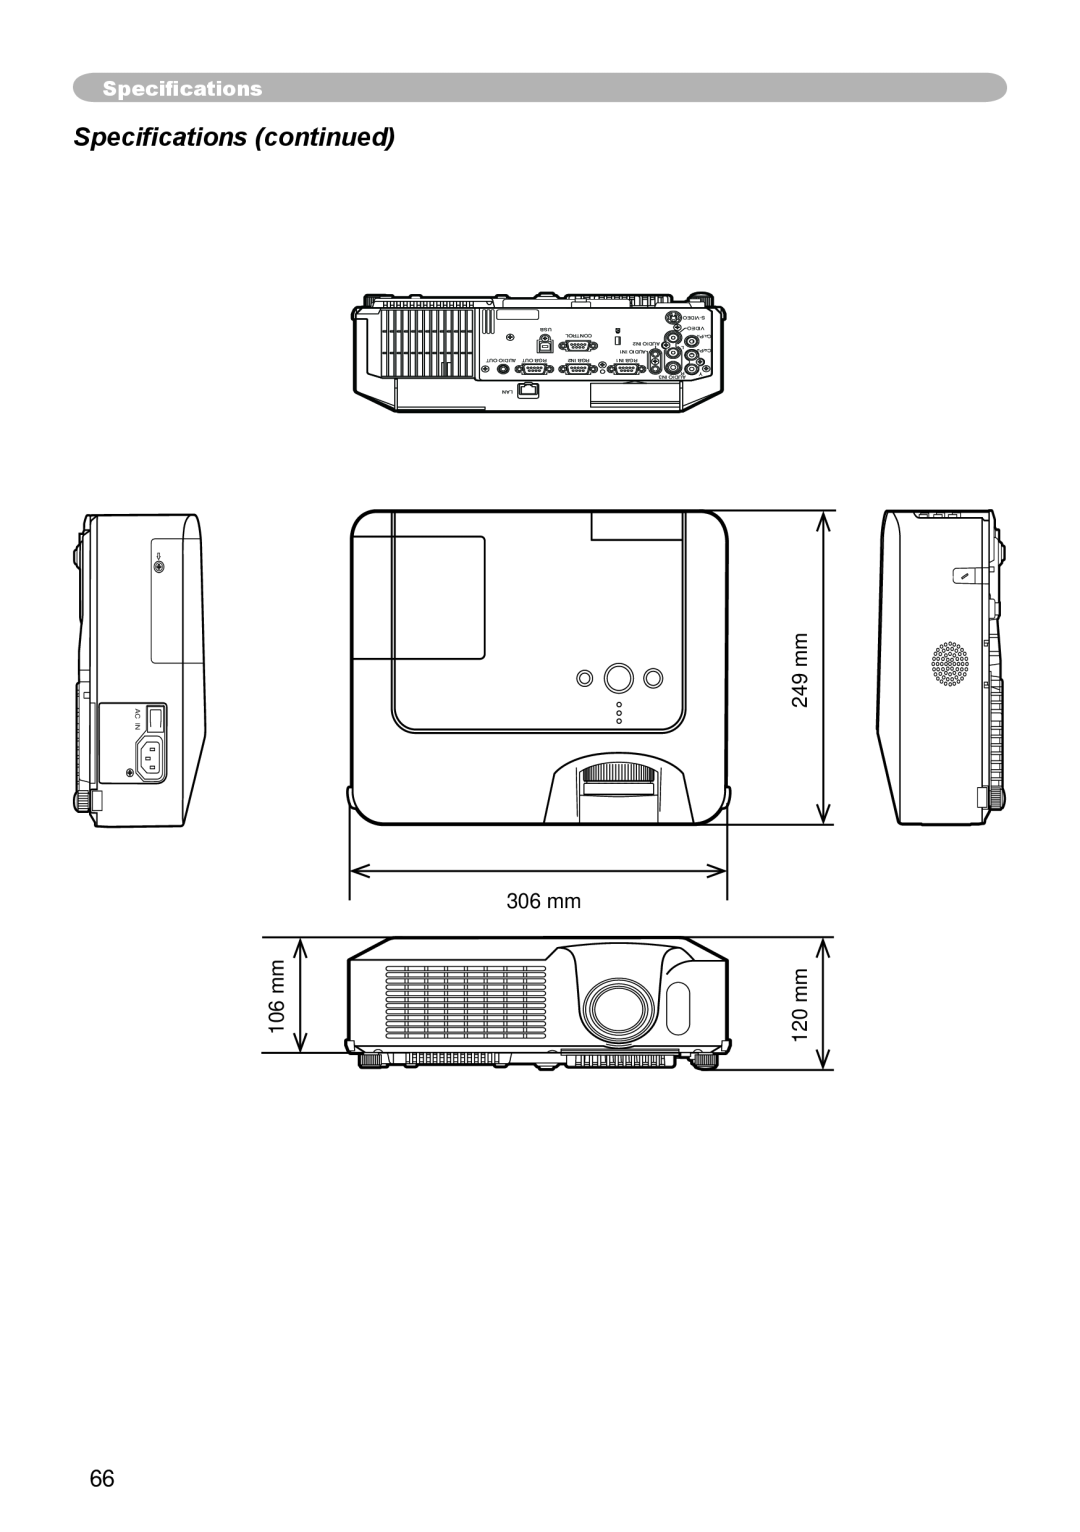 Hitachi CP-X265 user manual Specifications continued, 106 mm, 249 mm 306 mm 120 mm 